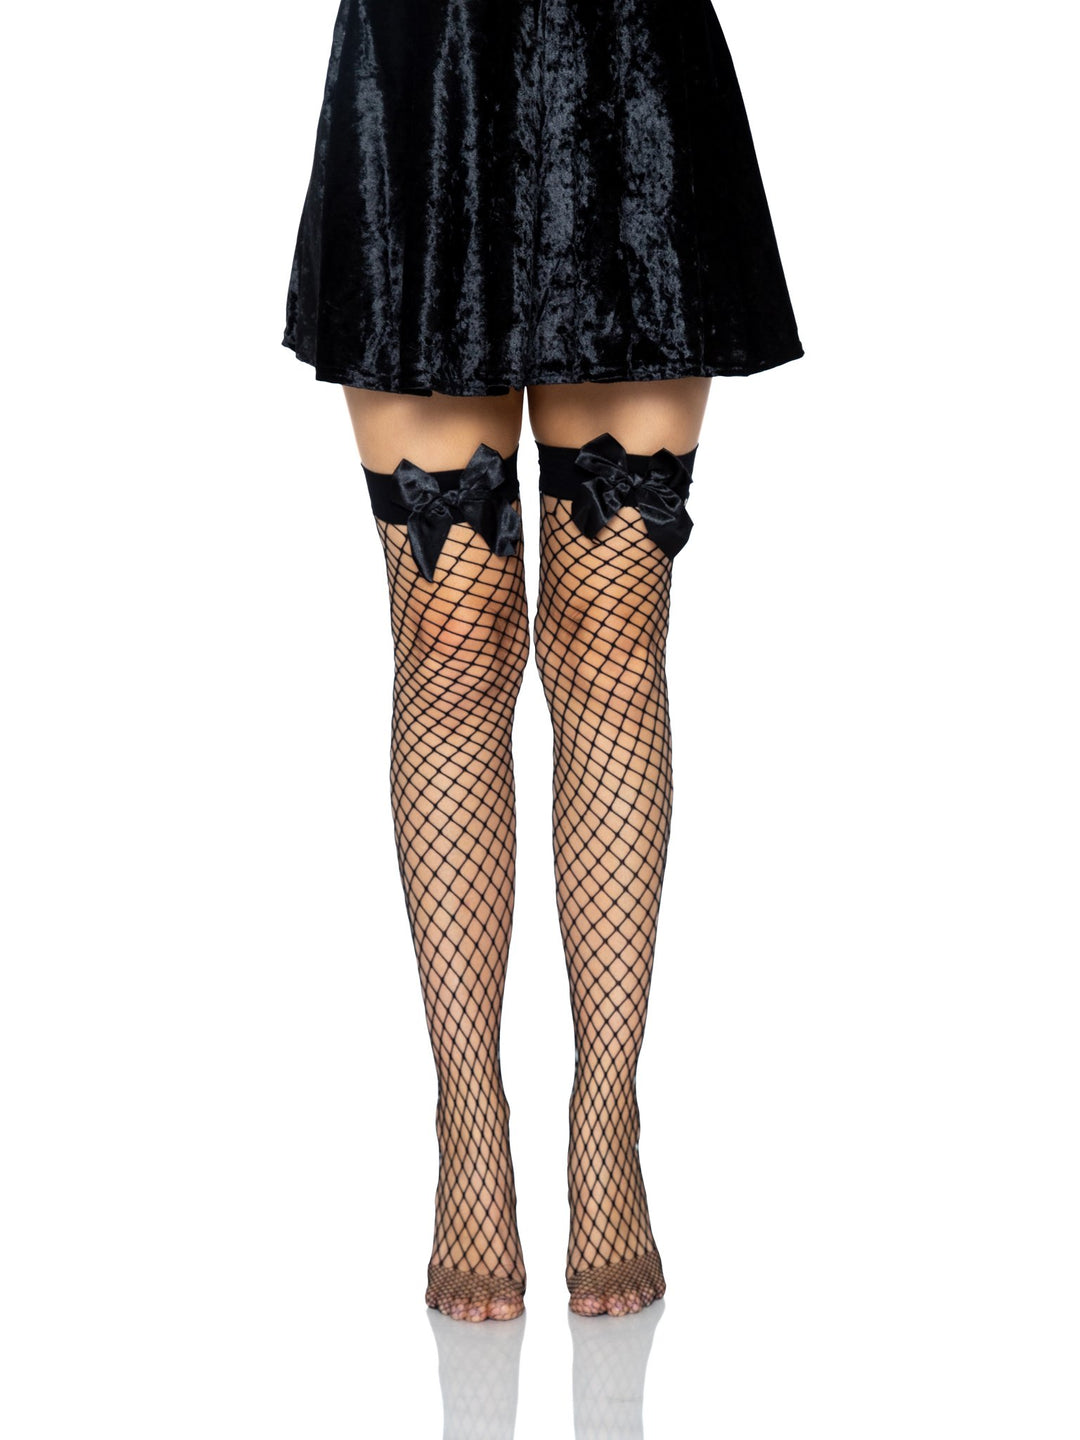 Fishnet Stay Up Thigh Highs with Bow Top